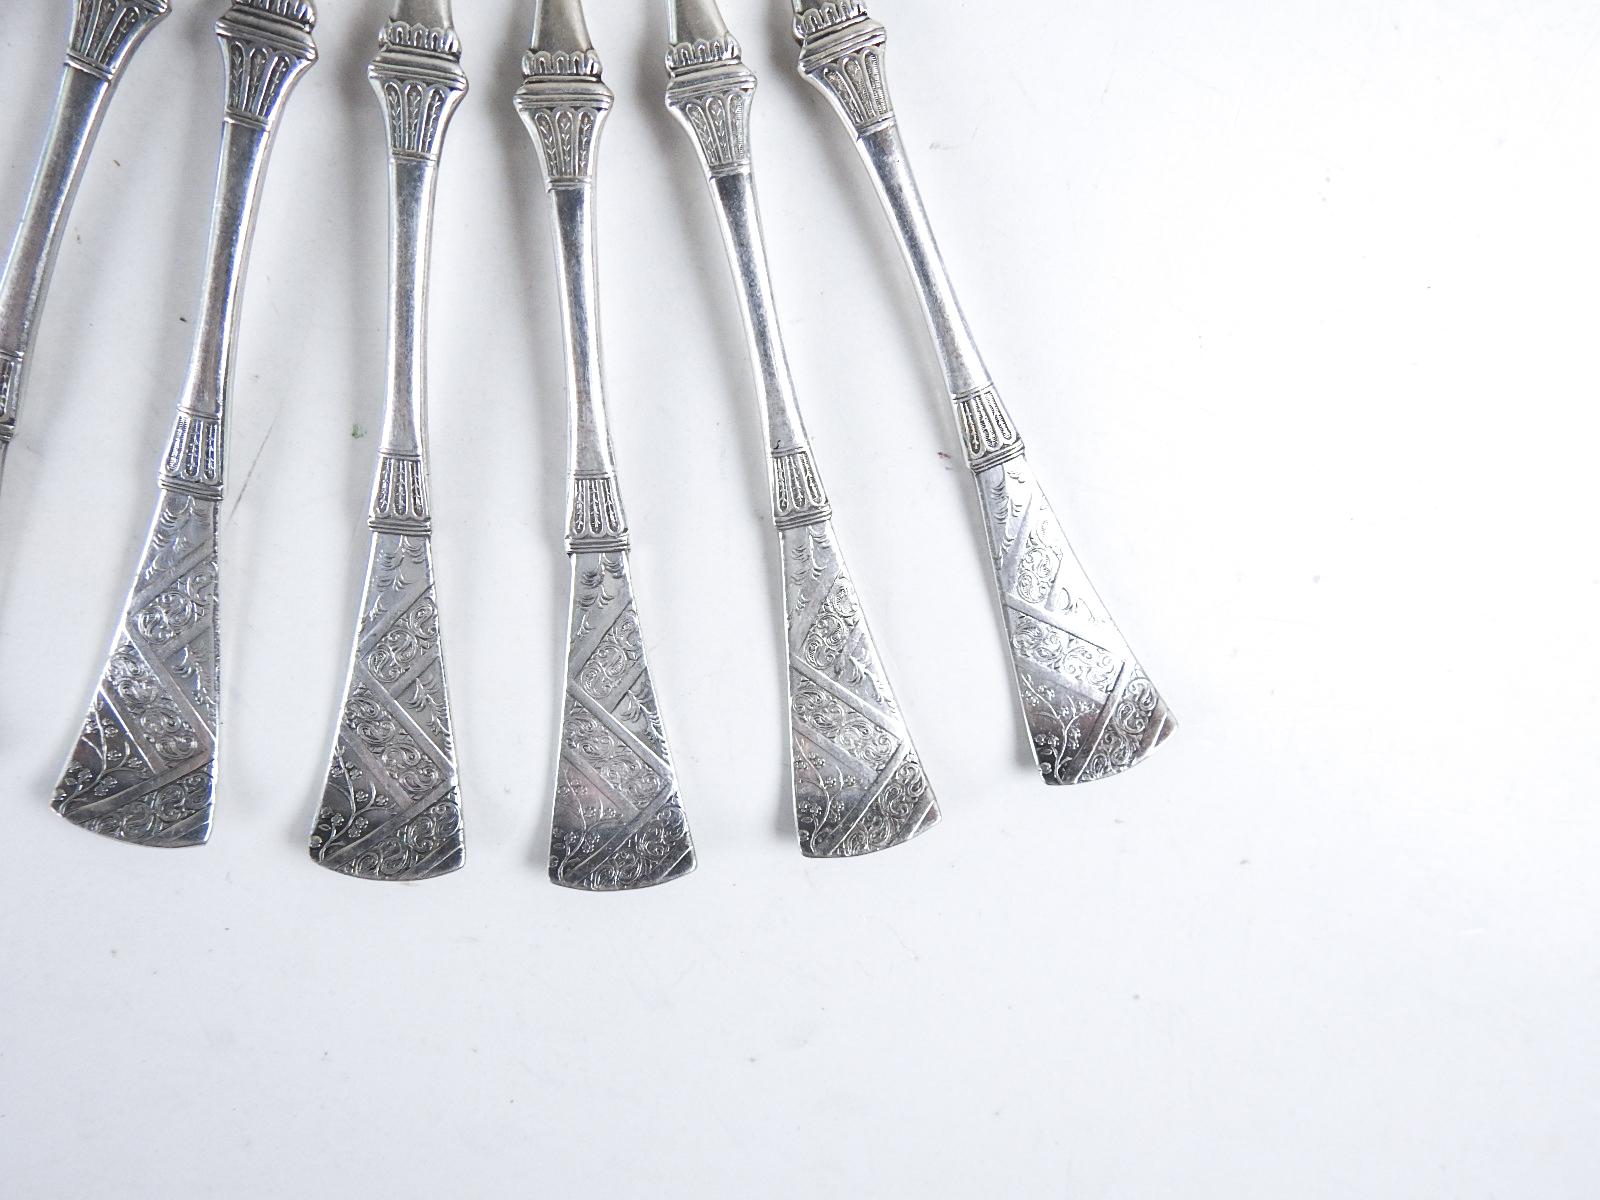 Mid-19th Century Antique 1860s Silverplate Aesthetic Movement Nut Cheese Picks - Set of 8 For Sale